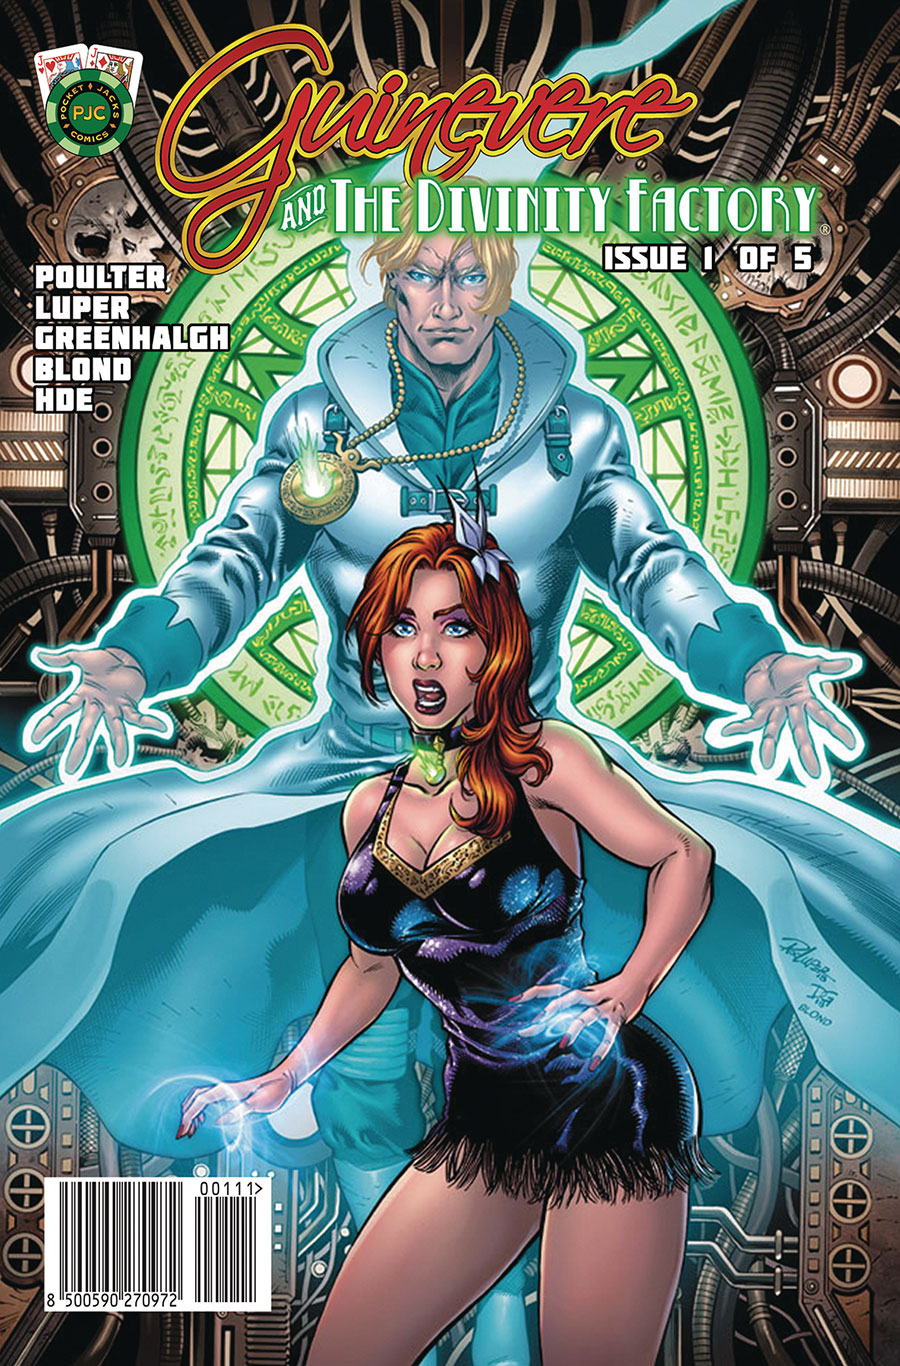 Guinevere And The Divinity Factory #1 Cover A Regular Rod Luper & Diane Greenhalgh Cover